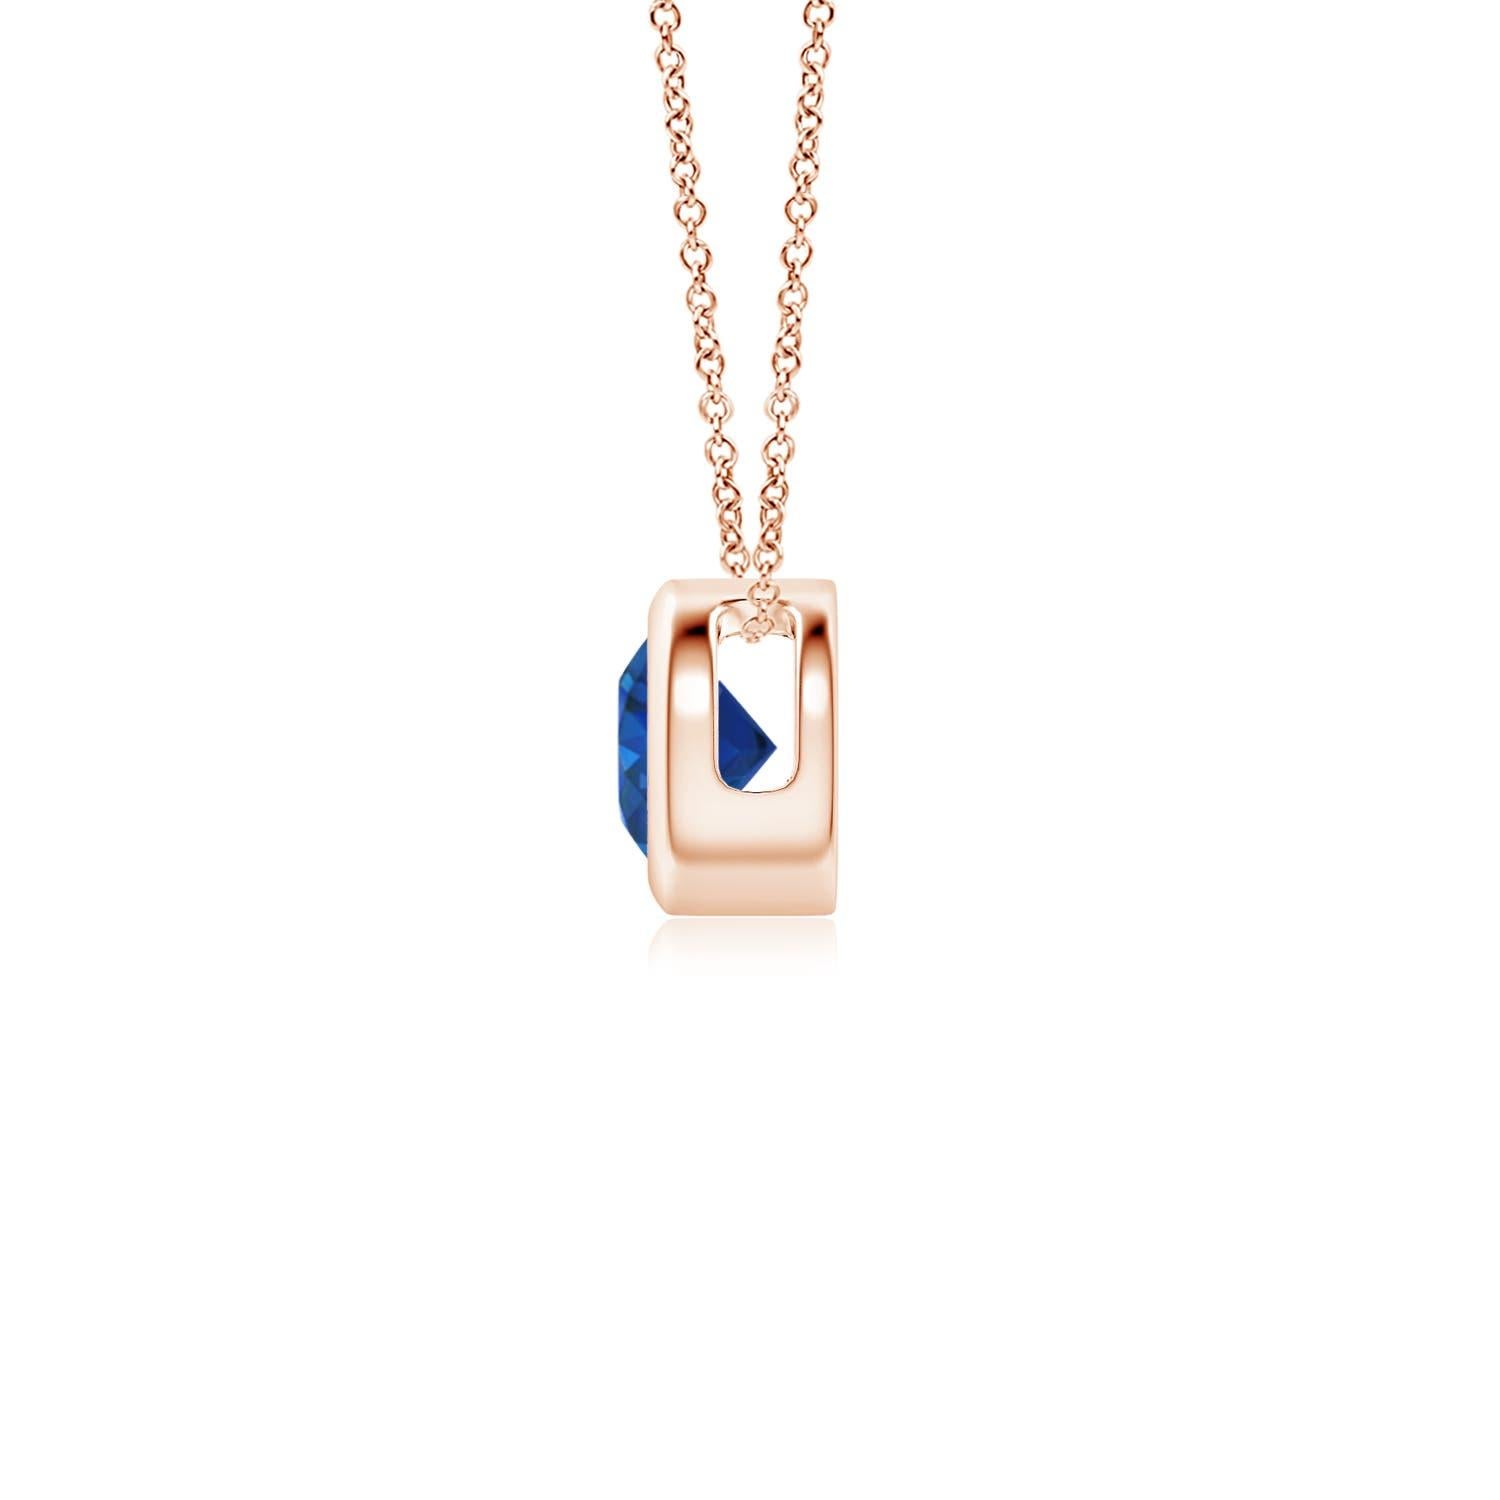 This classic solitaire sapphire pendant's beautiful design makes the center stone appear like it's floating on the chain. The radiant blue gem is secured in a bezel setting. Crafted in 14k rose gold, this round sapphire pendant is simple yet